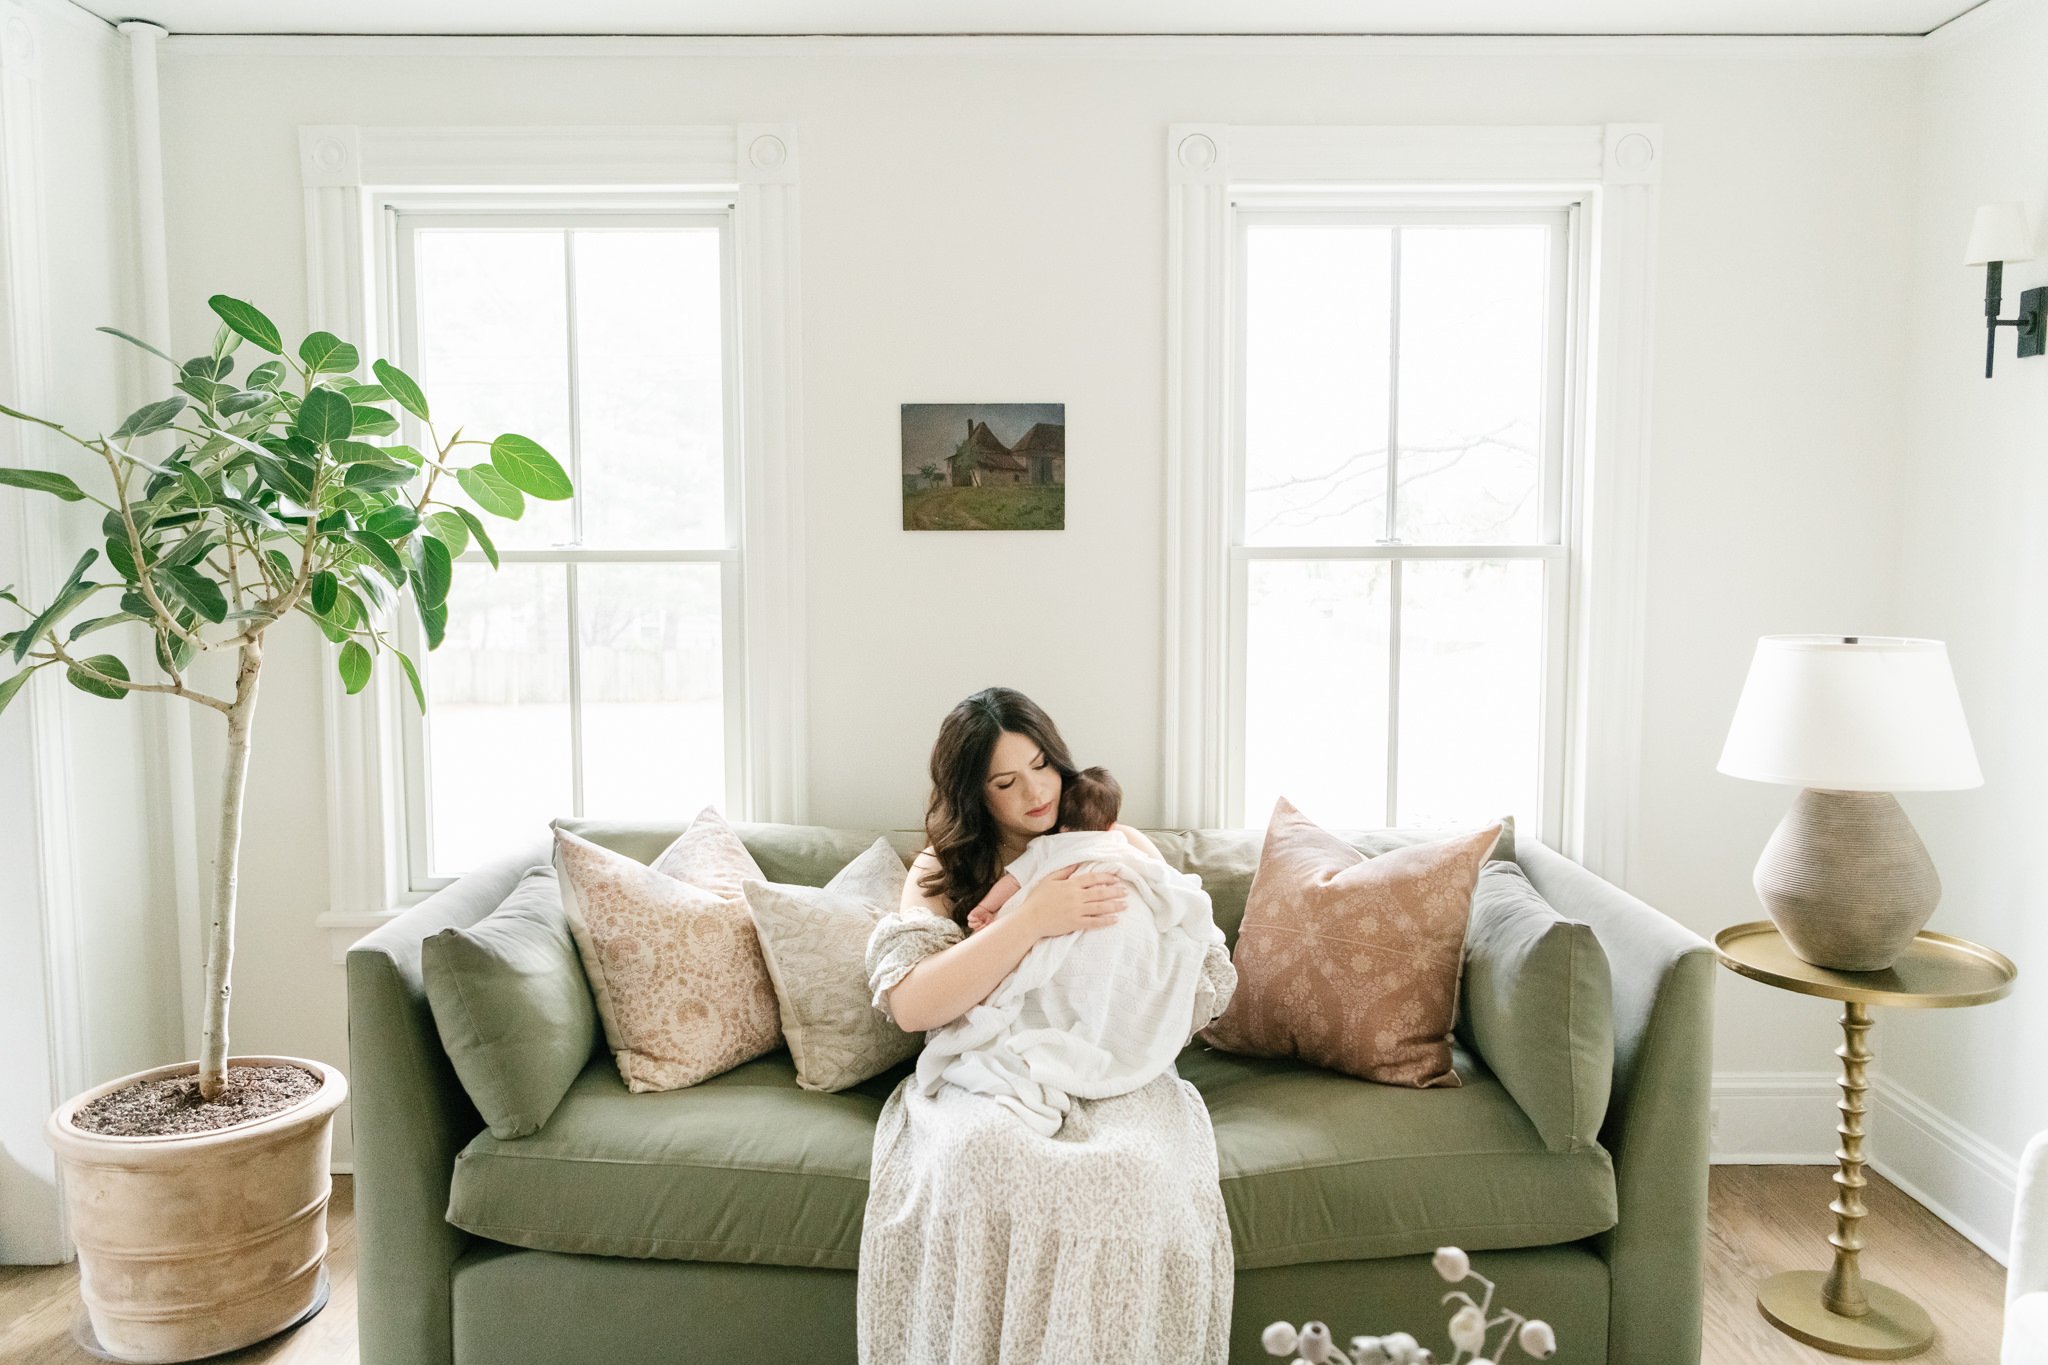  Nicole Hawkins Photography captures a portrait of a mother taking care of her baby in her own home. mother burping baby on couch #NicoleHawkinsPhotography #NicoleHawkinsNewborns #MontclairNewbornPhotographer #InHomeNewborns #NJNewborns #Babygirl #Ne